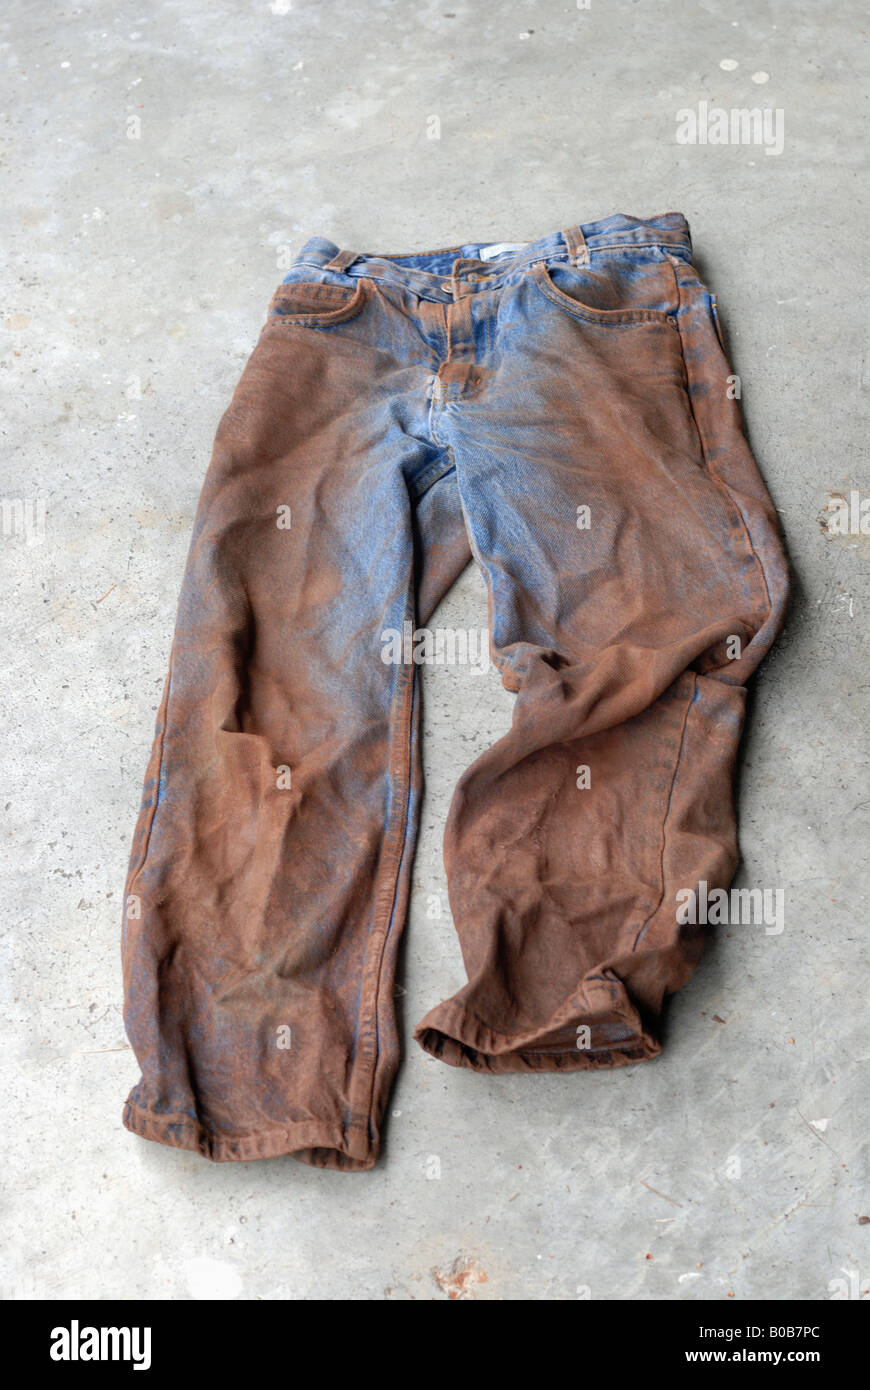 2,648 Stained Pants Images, Stock Photos, 3D objects, & Vectors